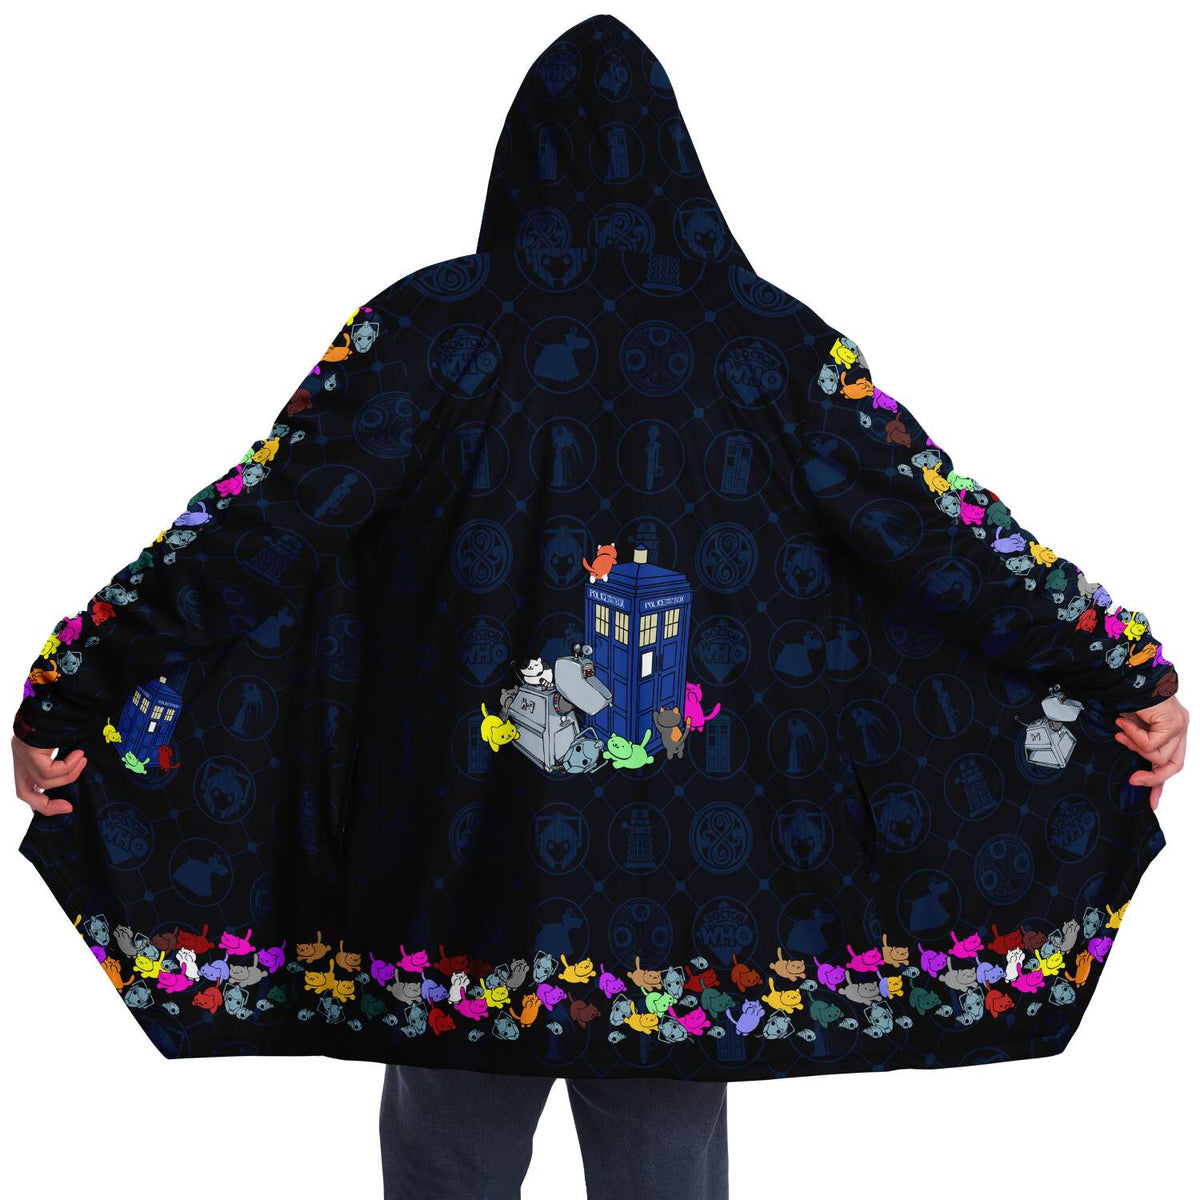 Neko's Playing with the TARDIS Inspired by Doctor Who Fleece Lined Cloak